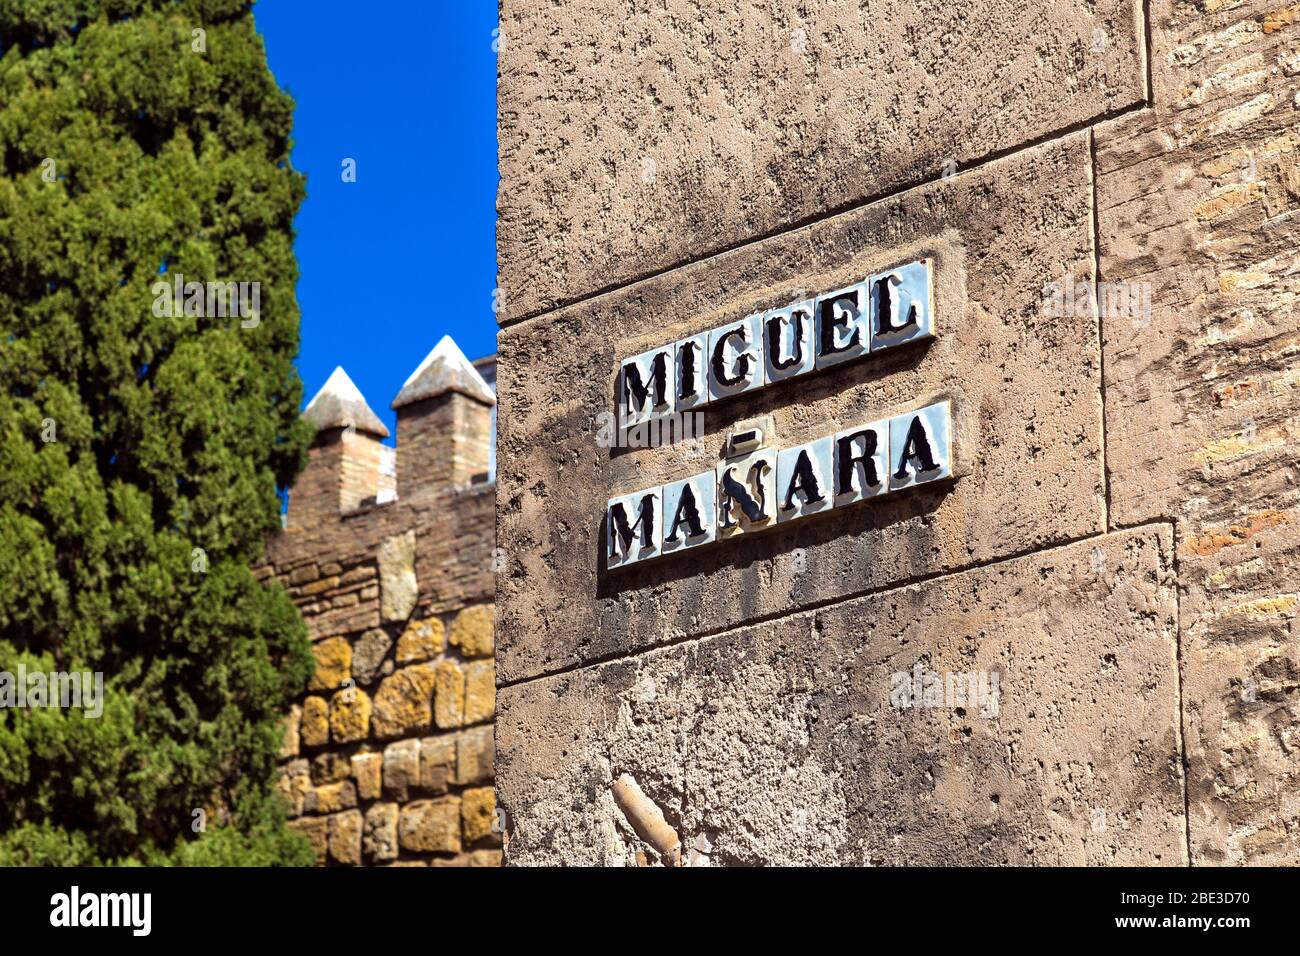 Sign for Calle Miguel Mañara, Seville, Andalusia, Spain Stock Photo